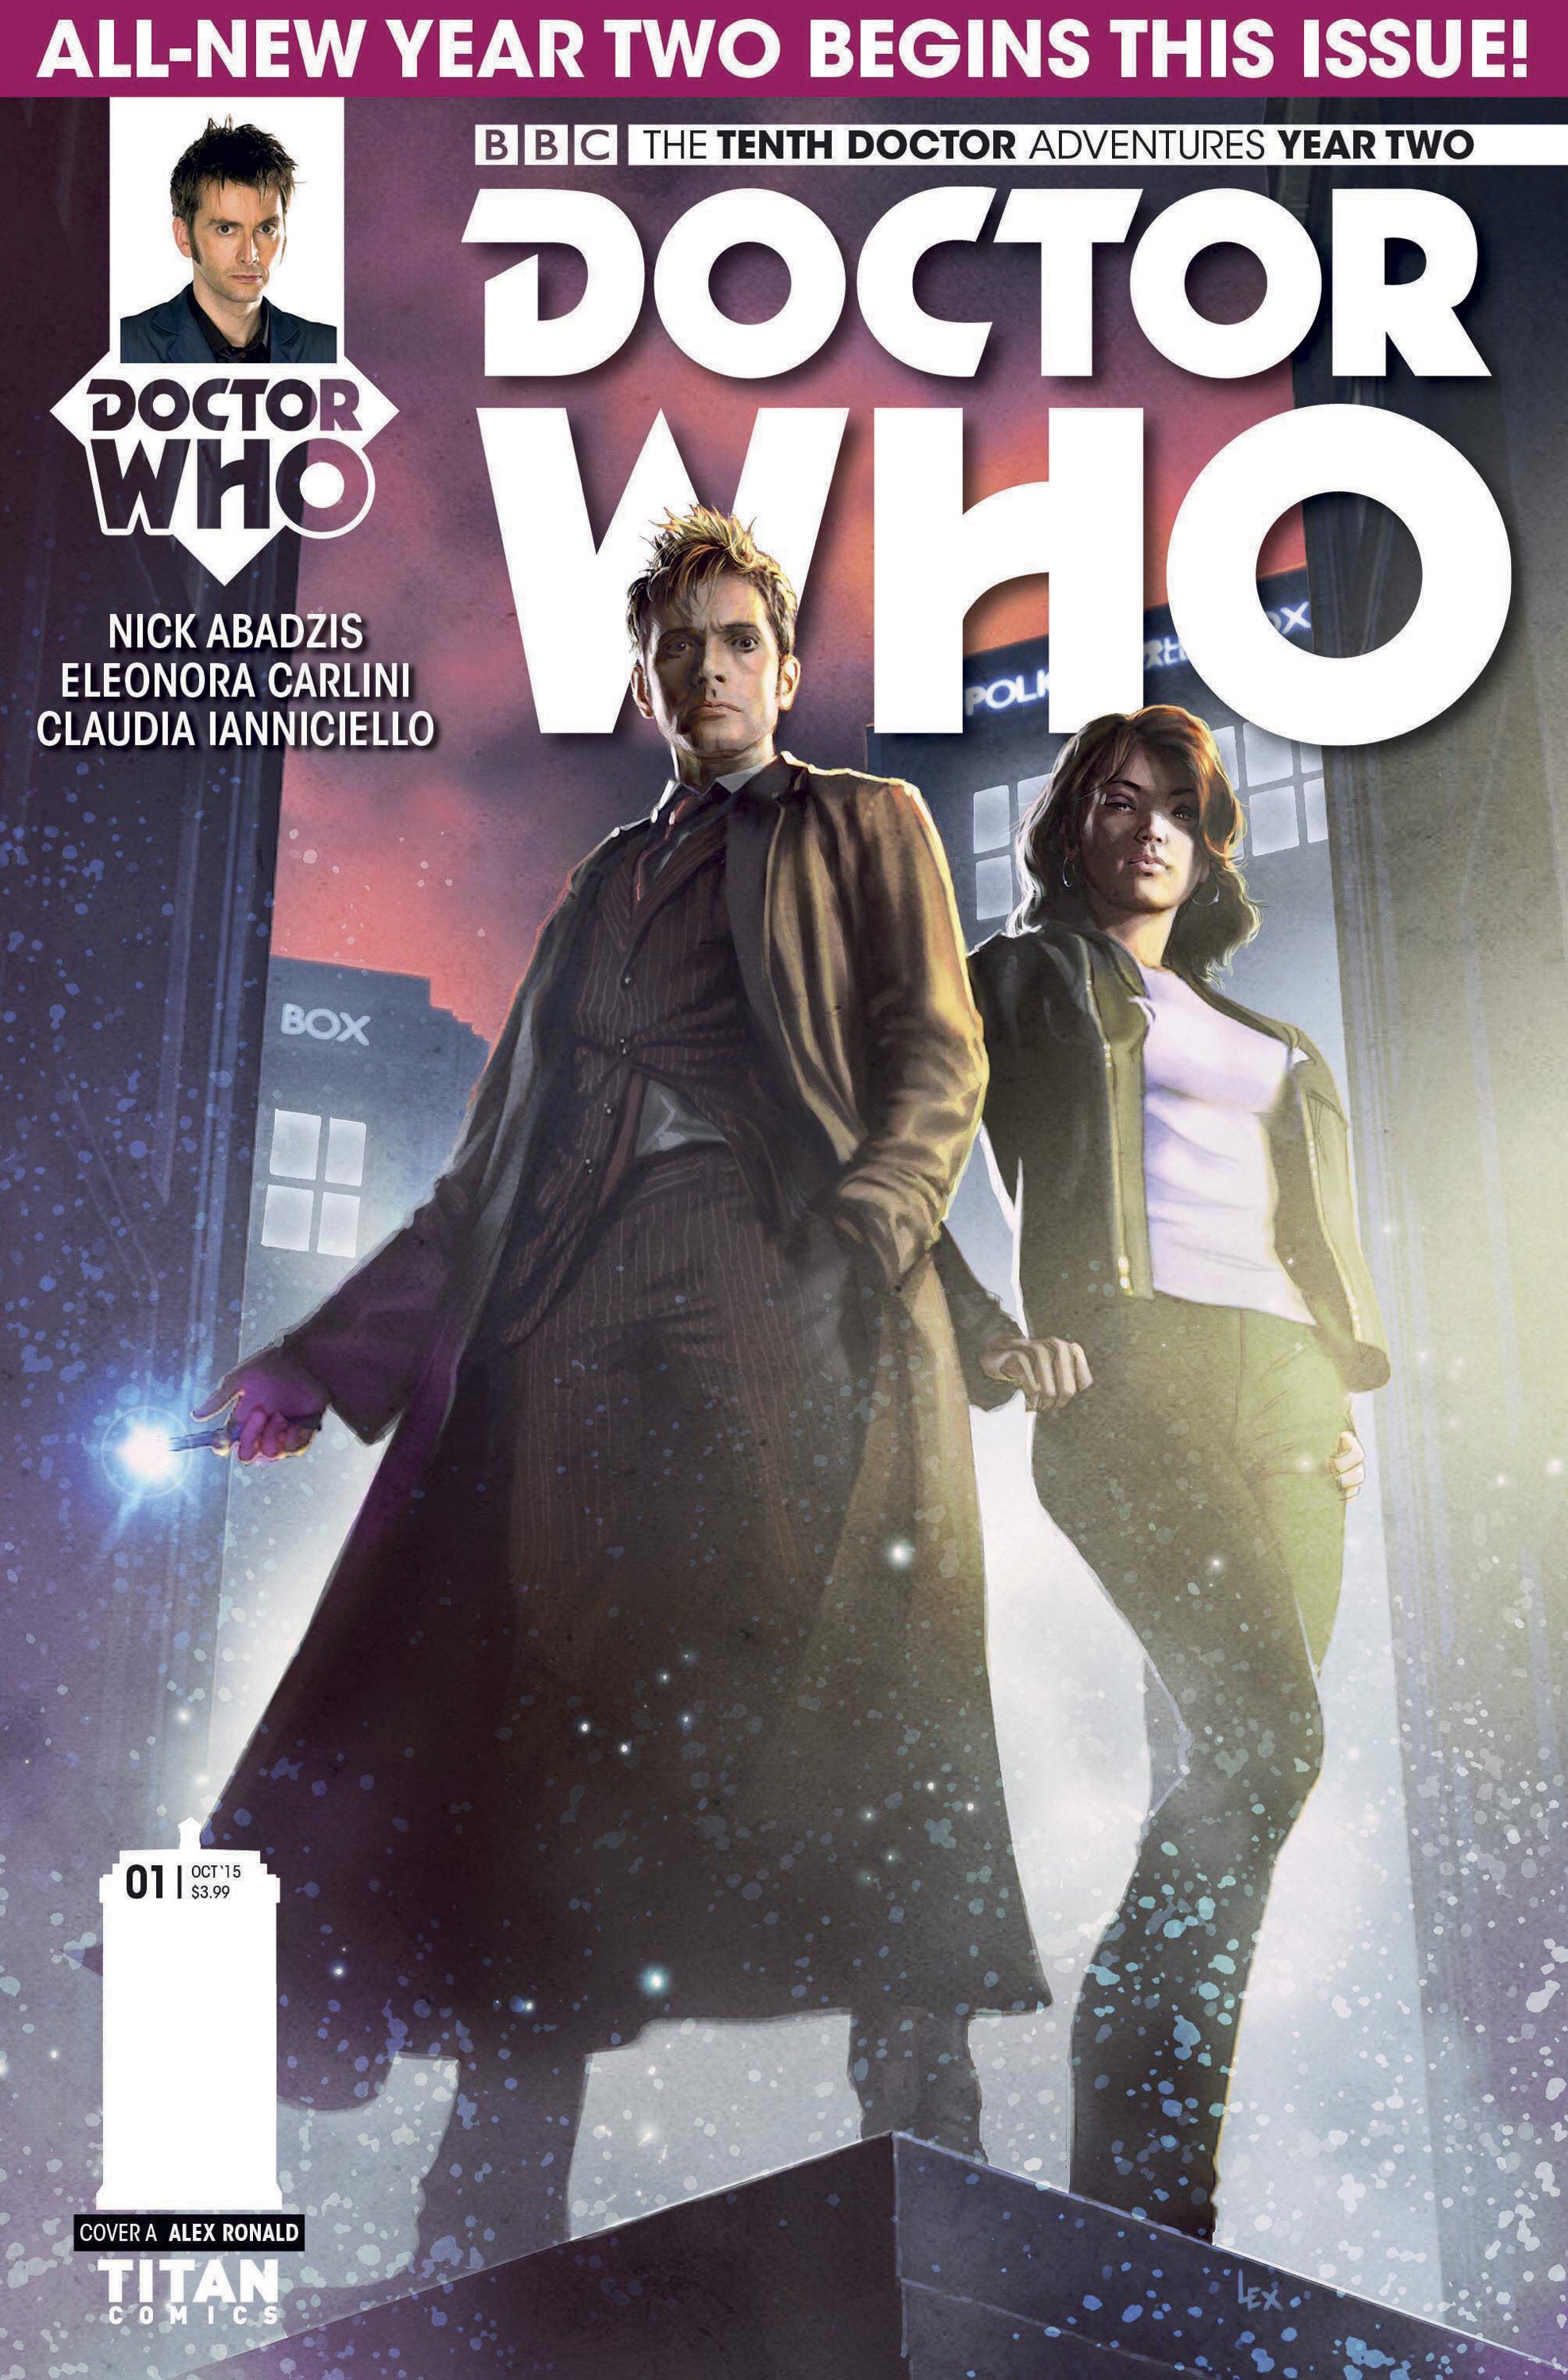 Doctor Who: The Tenth Doctor: Year Two #1 - Cover A